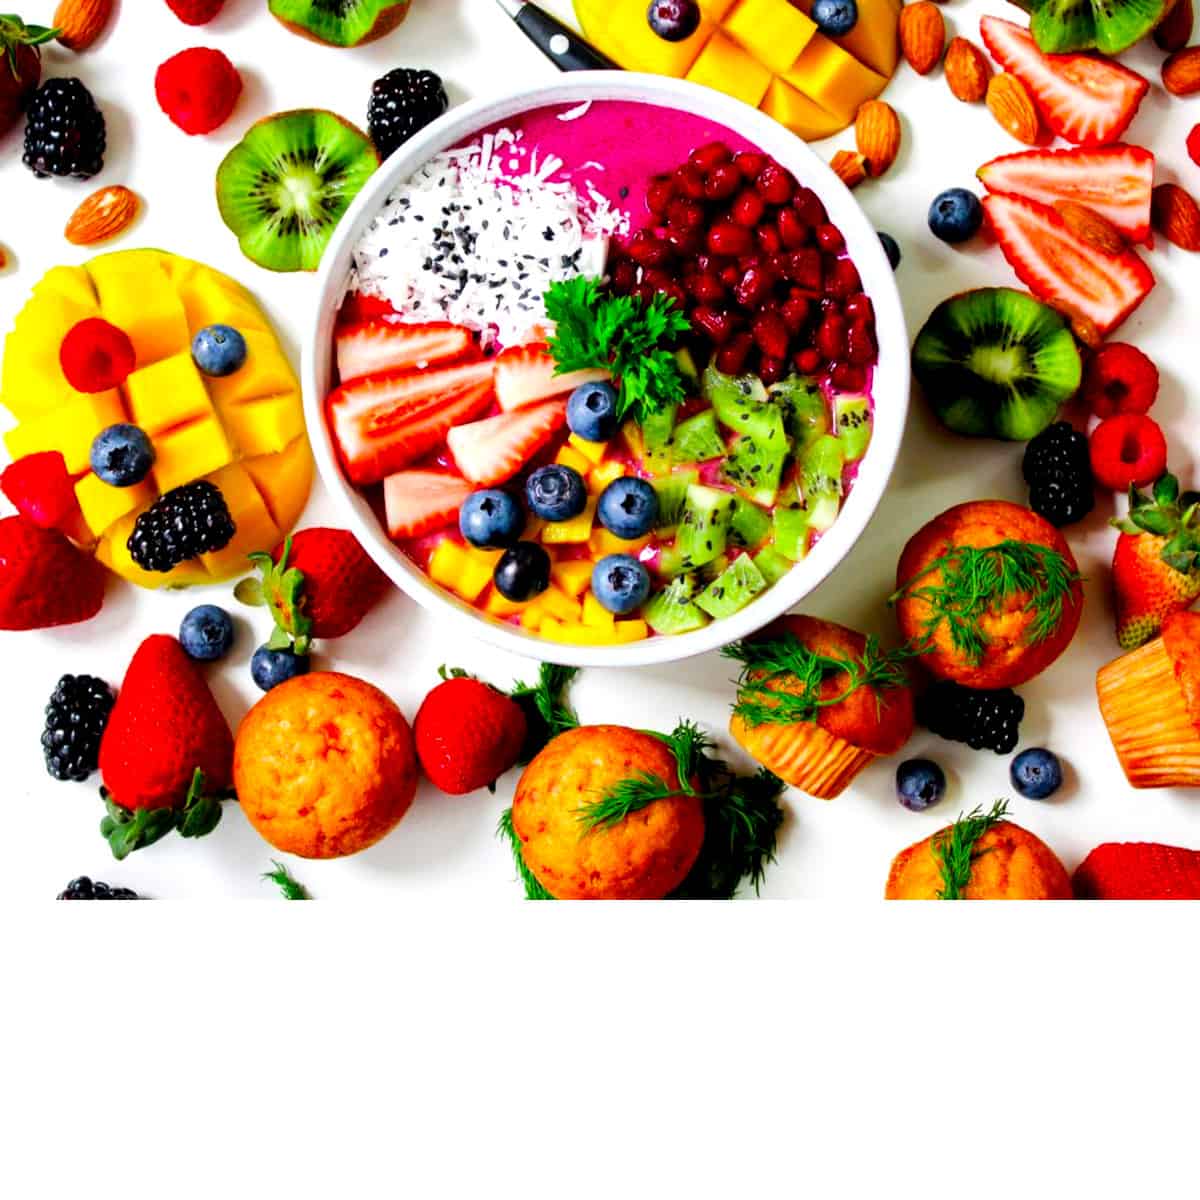 vibrantly colored food filled with healthy nutrients